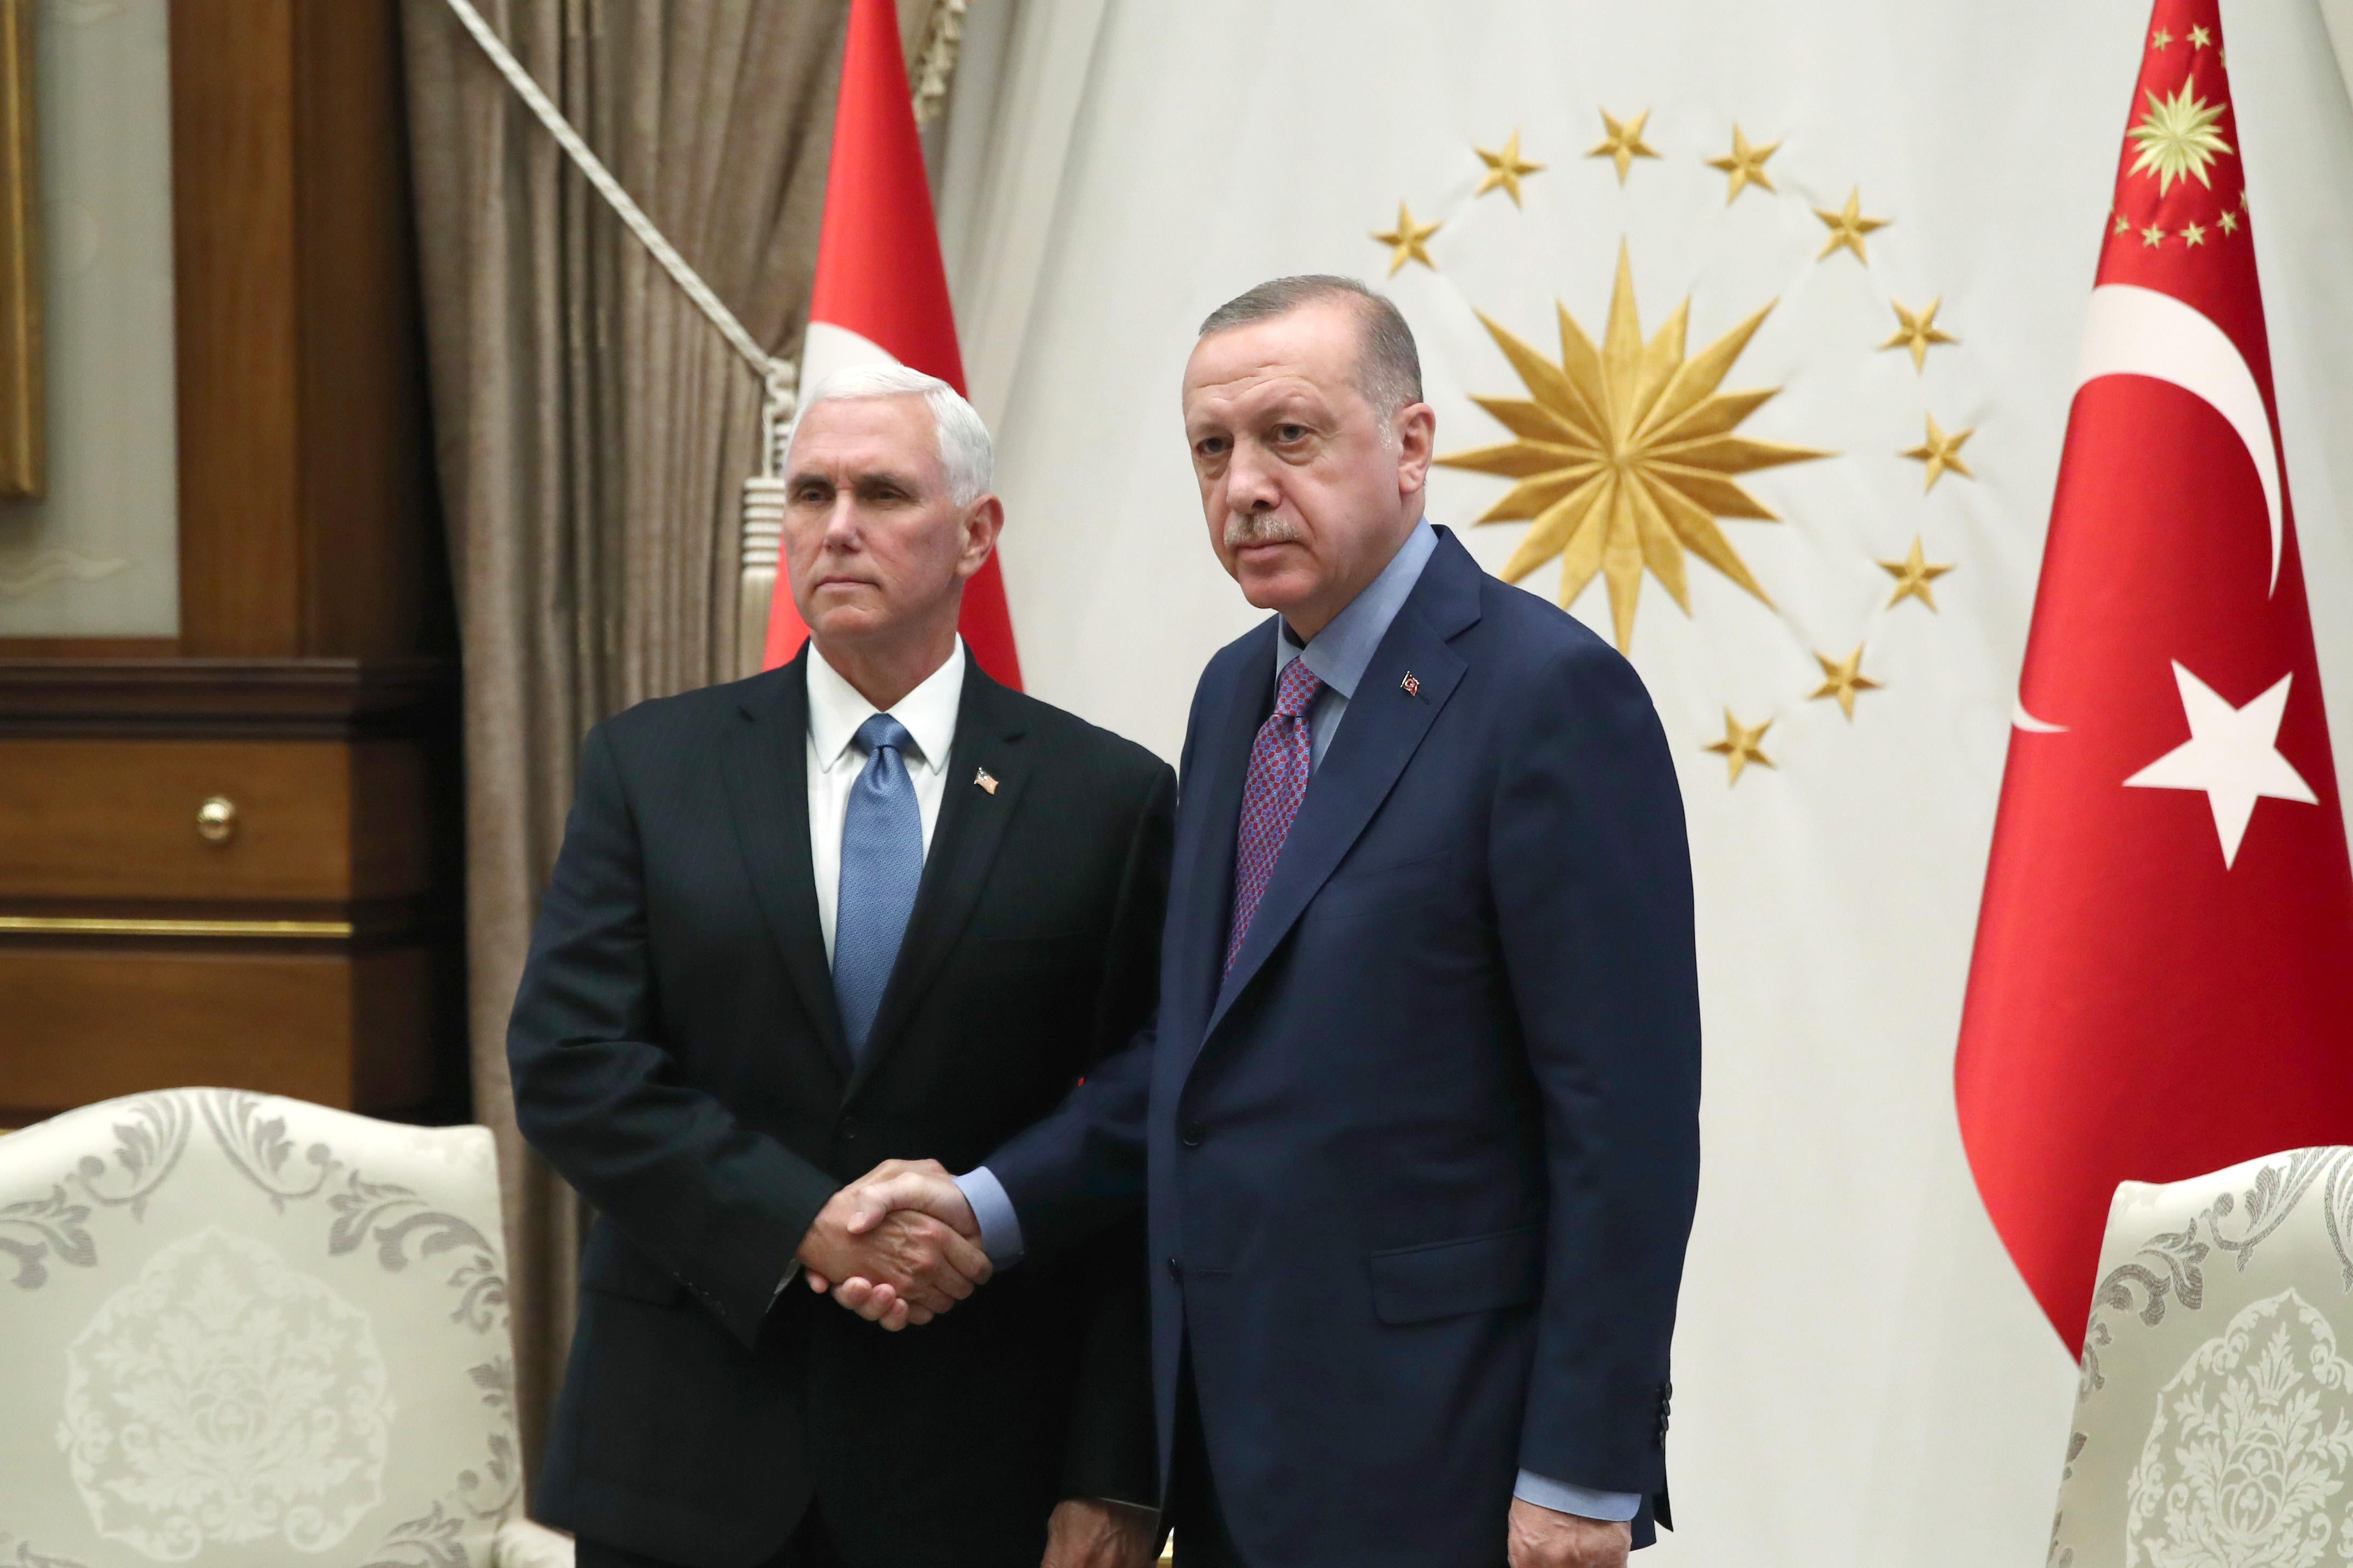 Mike Pence and Recep Tayyip Erdogan